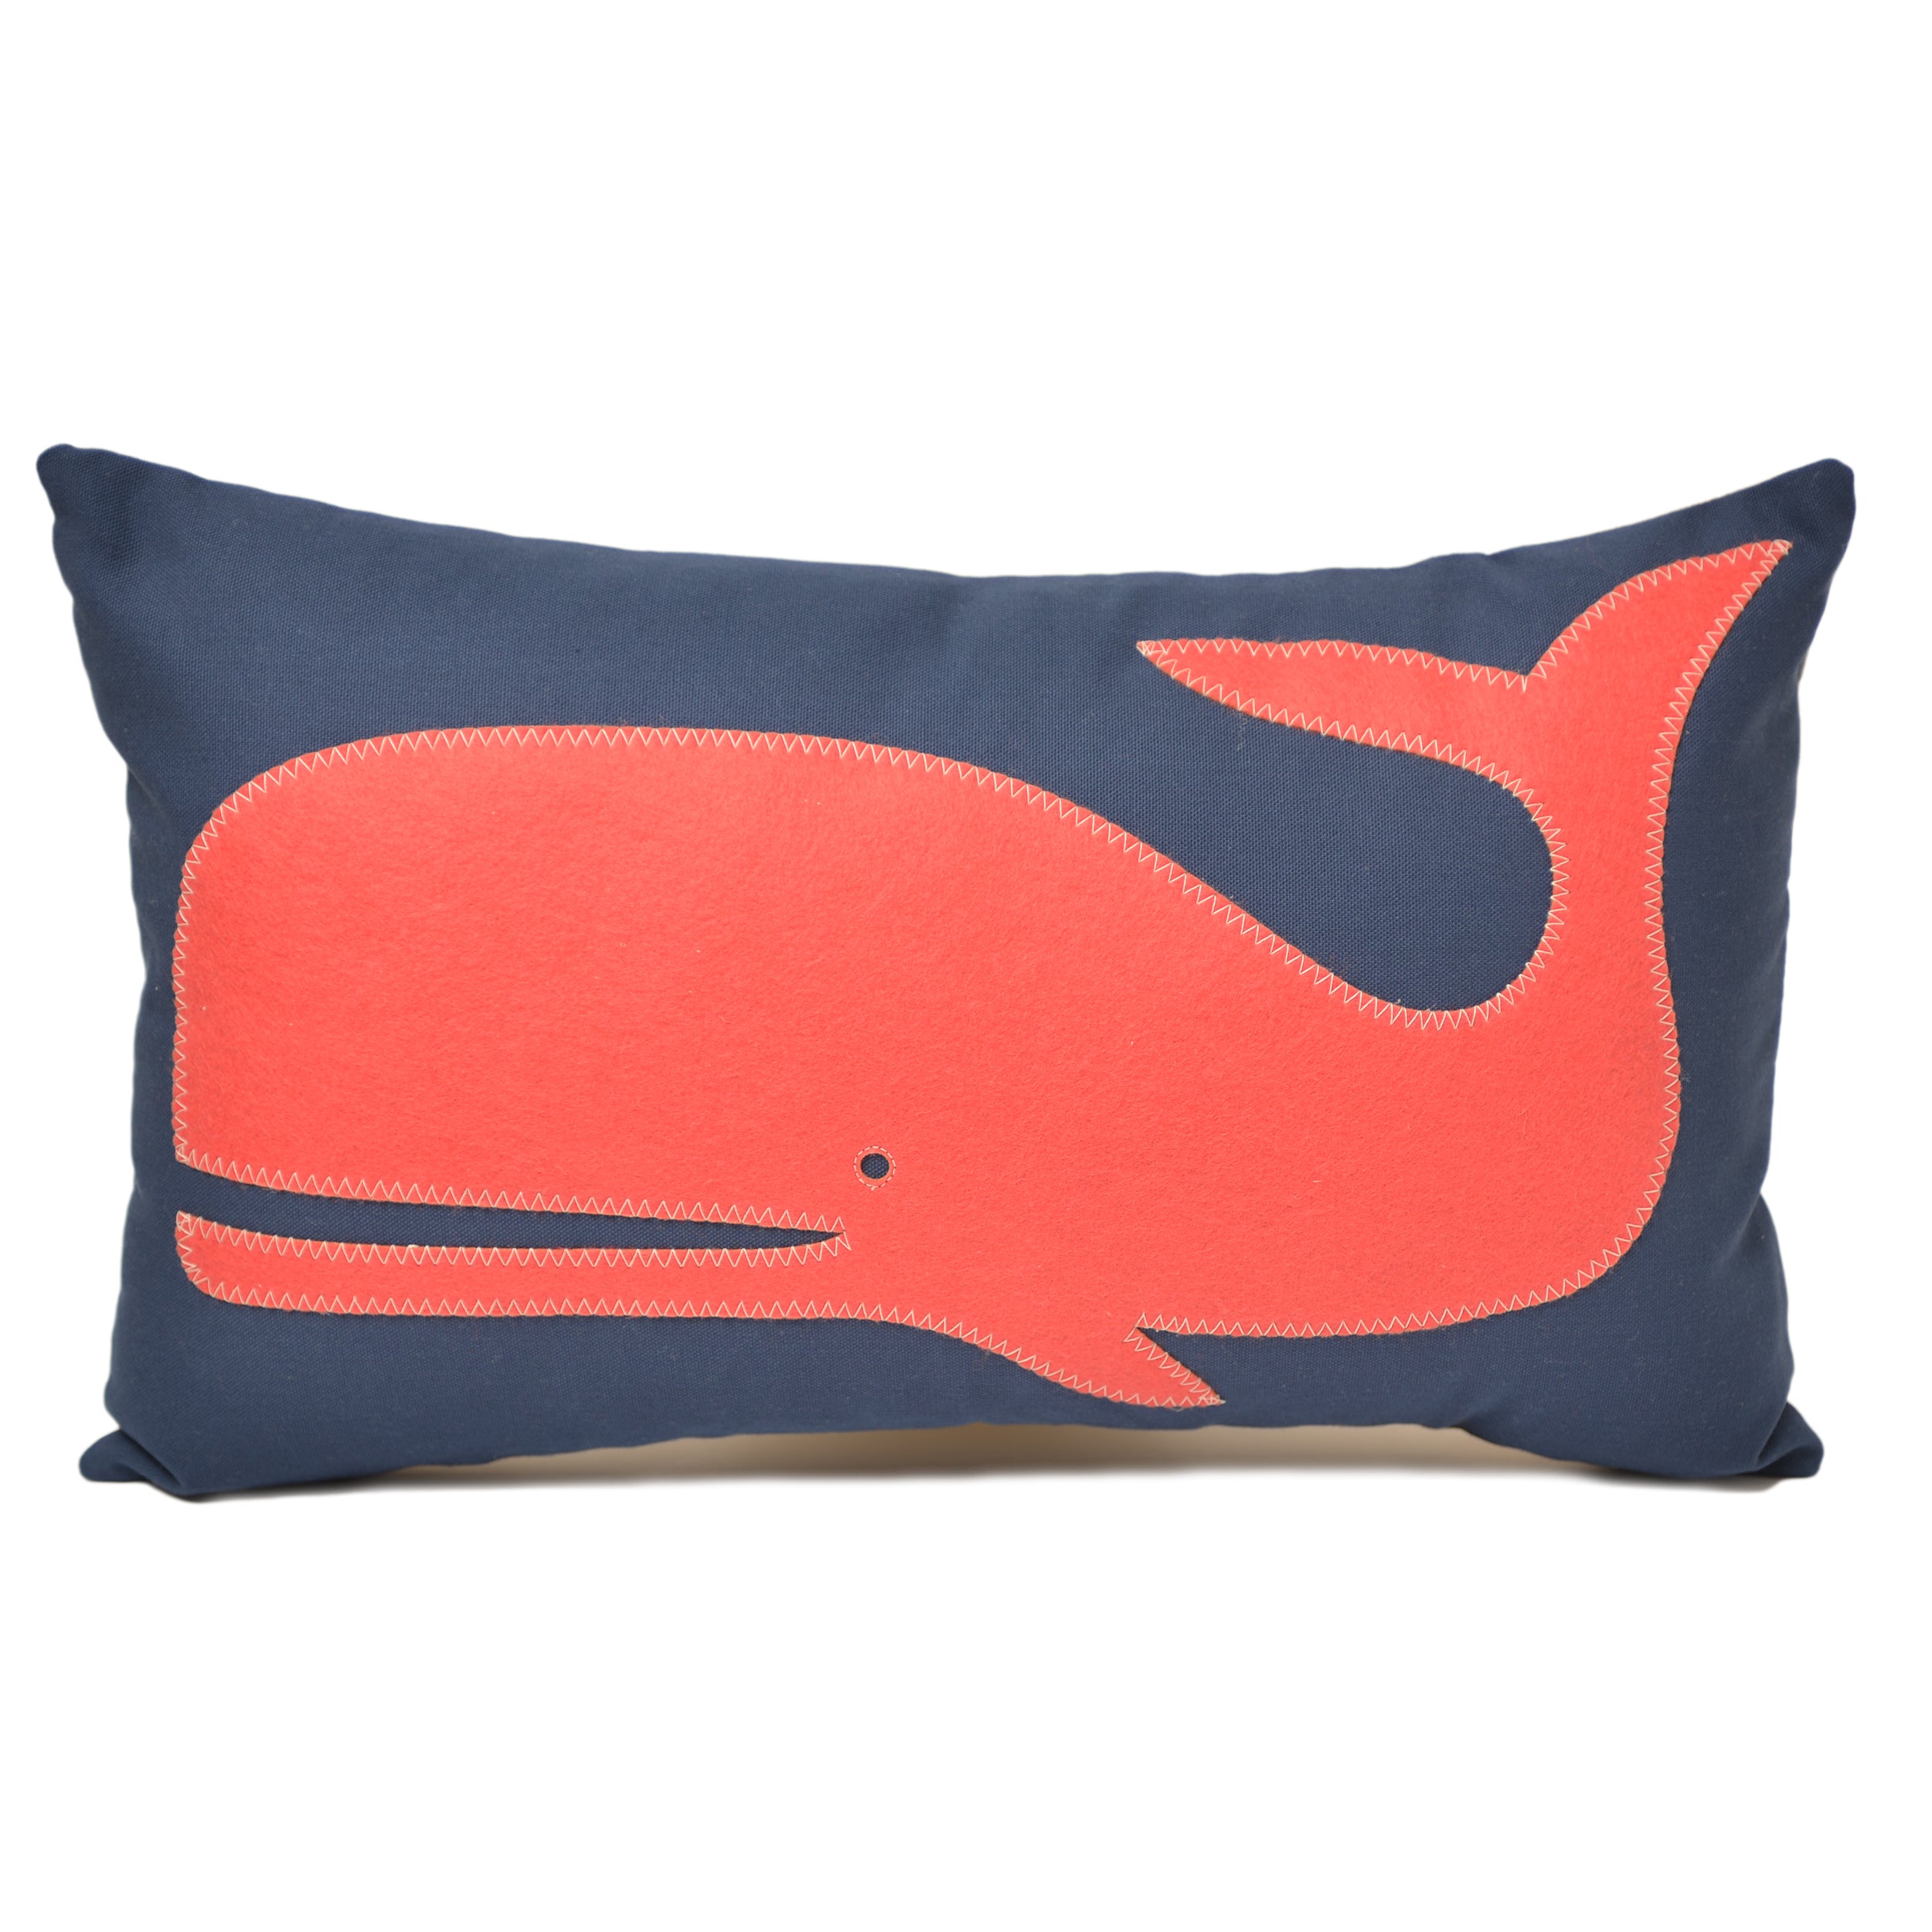 14x21" Tucker the Preppy Coral Red Whale pillow